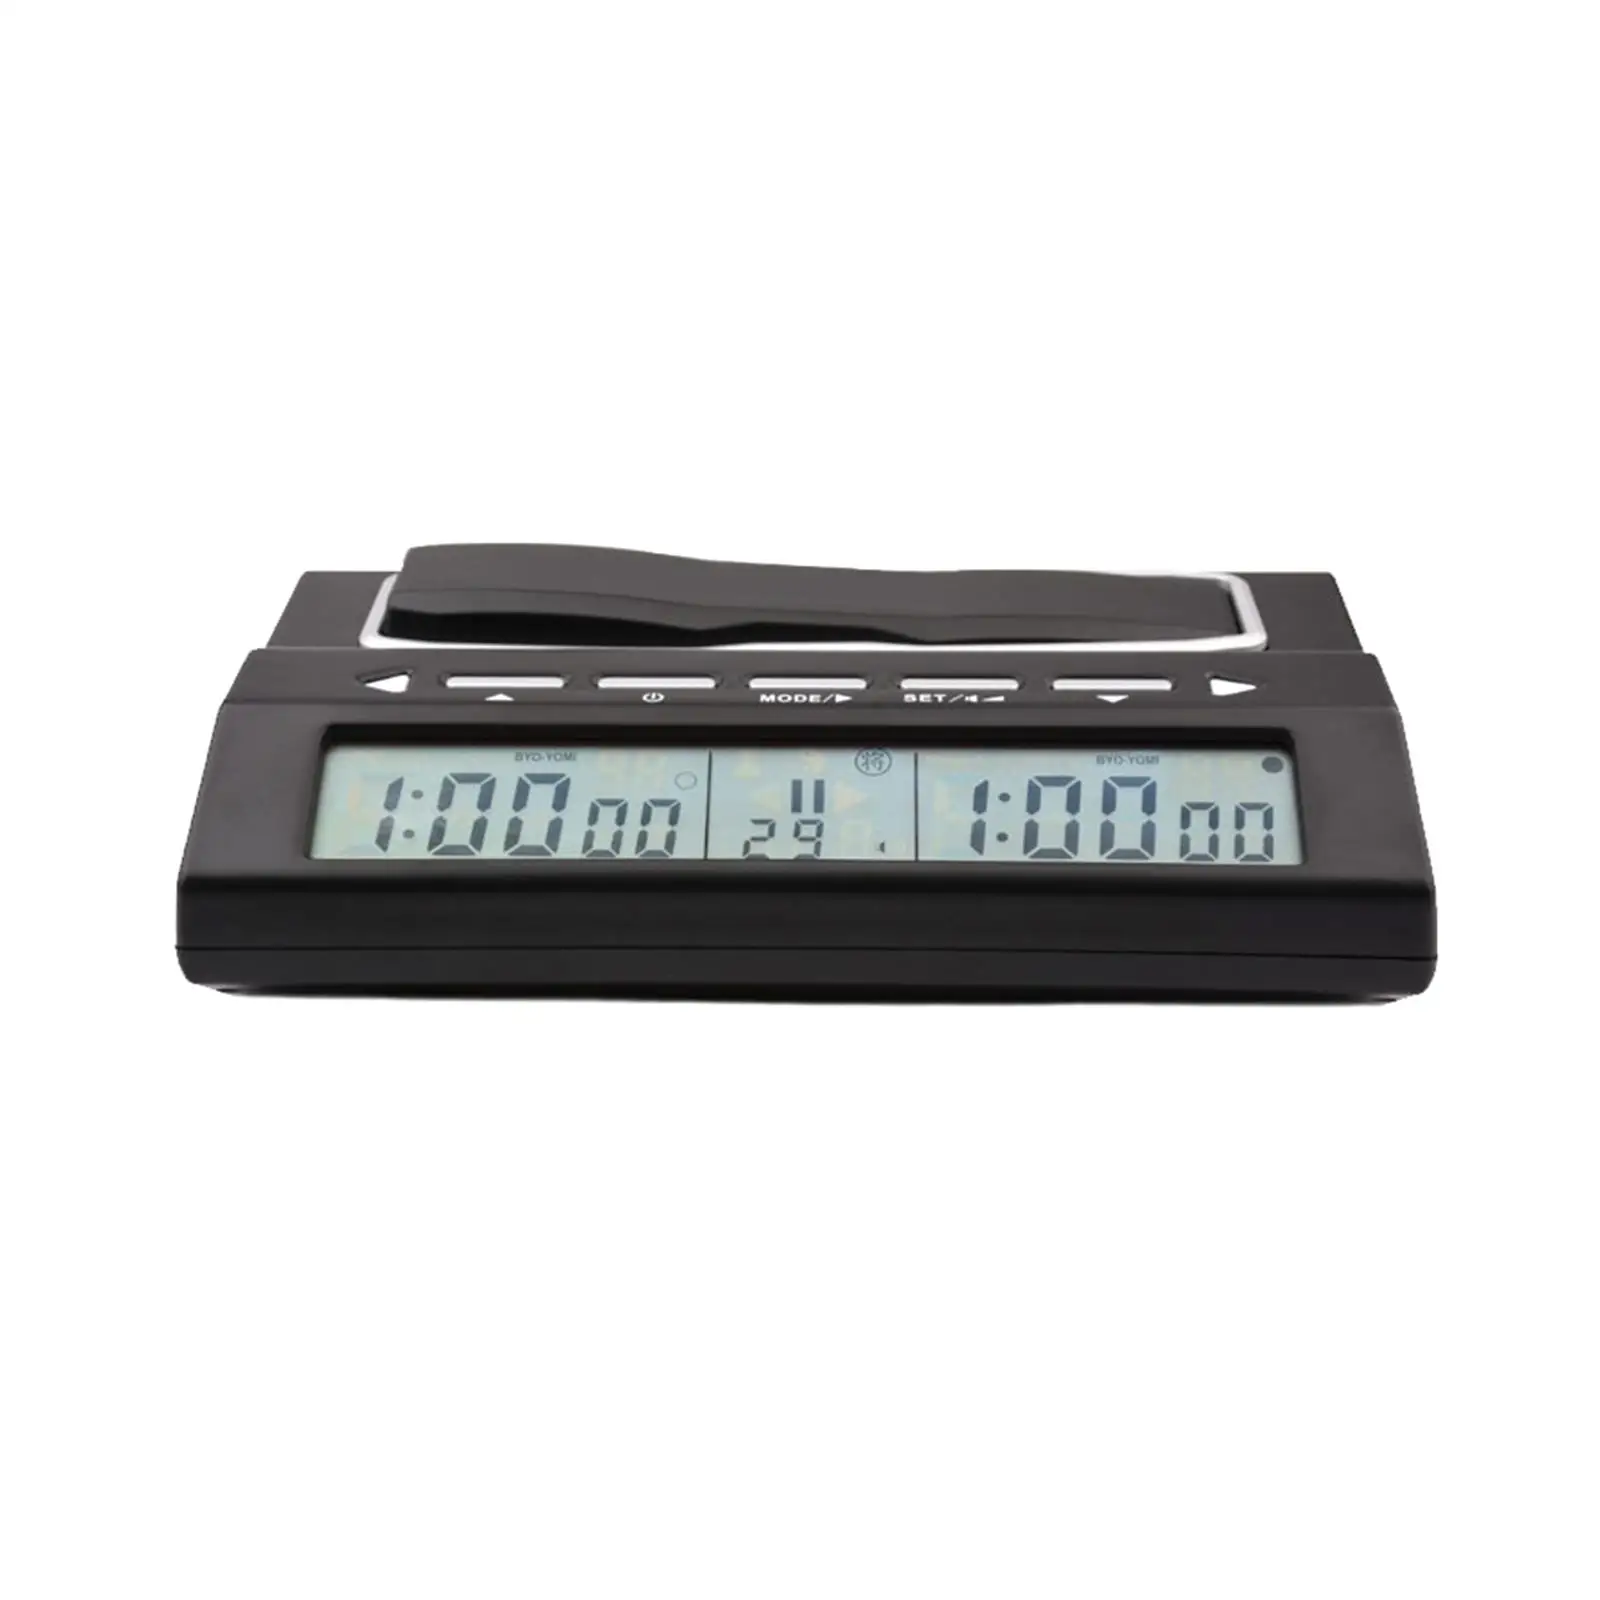 Portable Chess Clock Board Games Digital Chess Timer for Chinese Chess Game International Chess